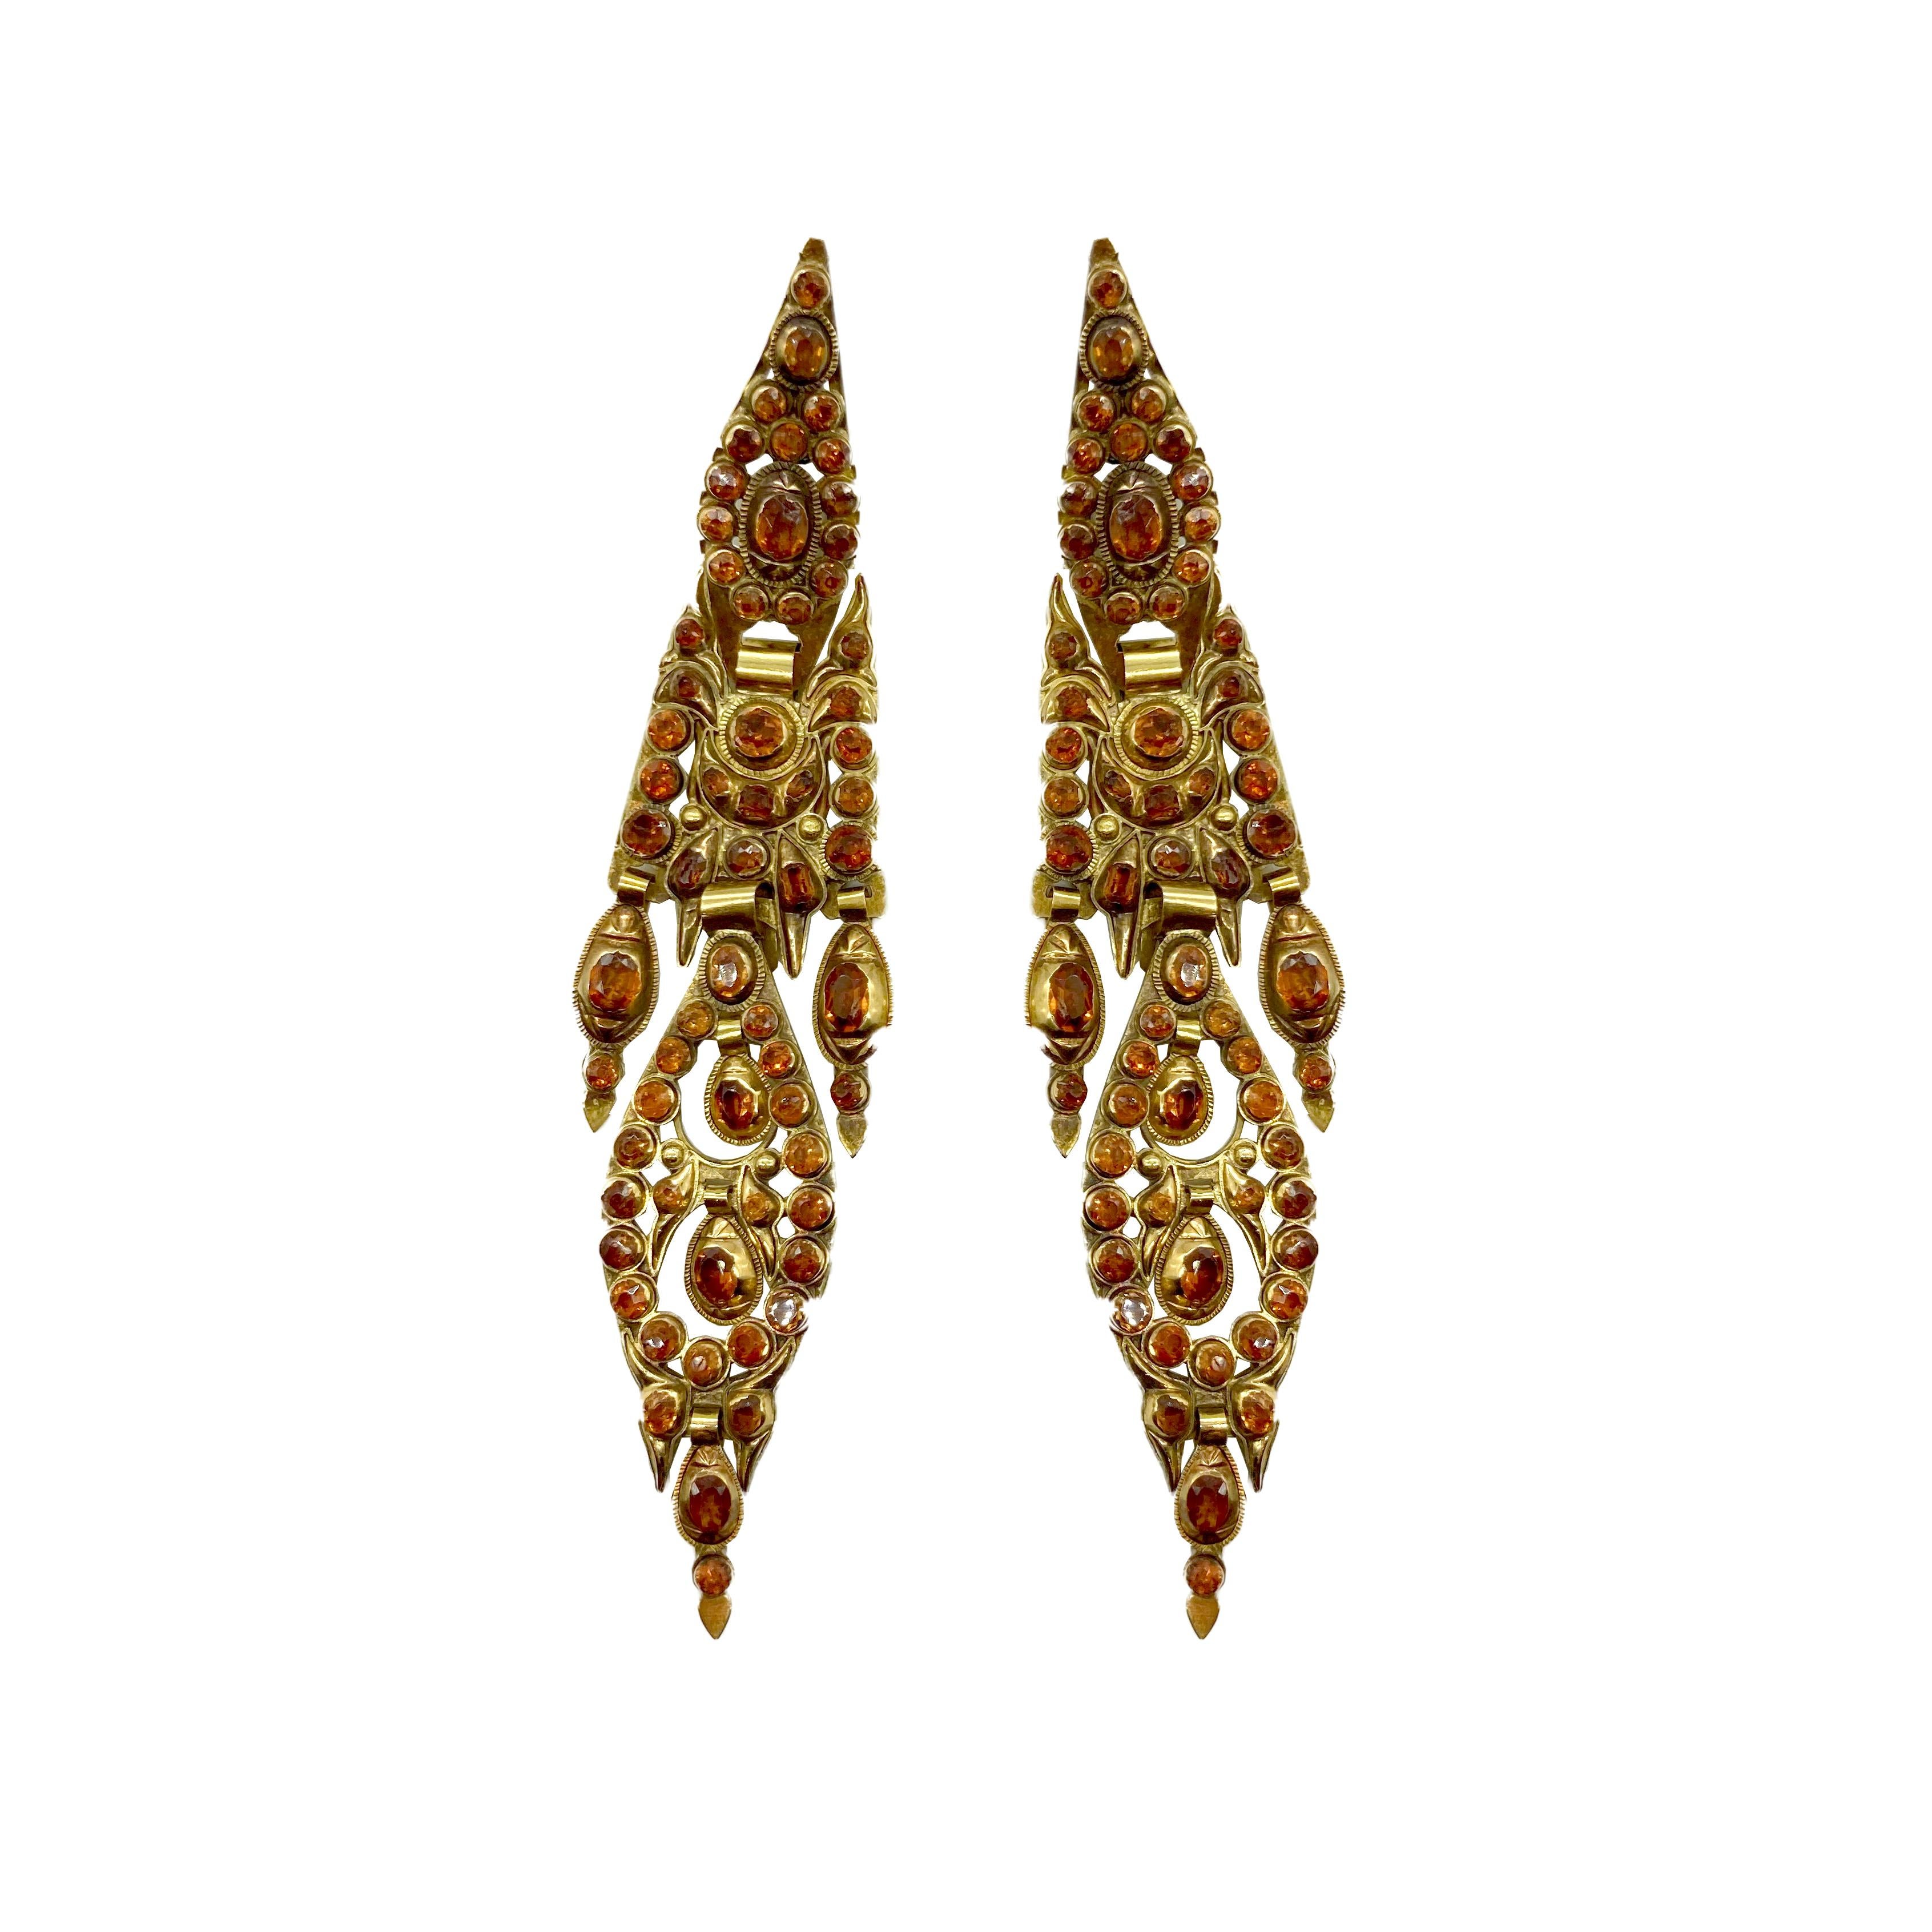 A stunning pair of antique Iberian earrings featuring a long cascade of spessartine garnets mounted in yellow gold. Made in Portugal, circa 18th century.